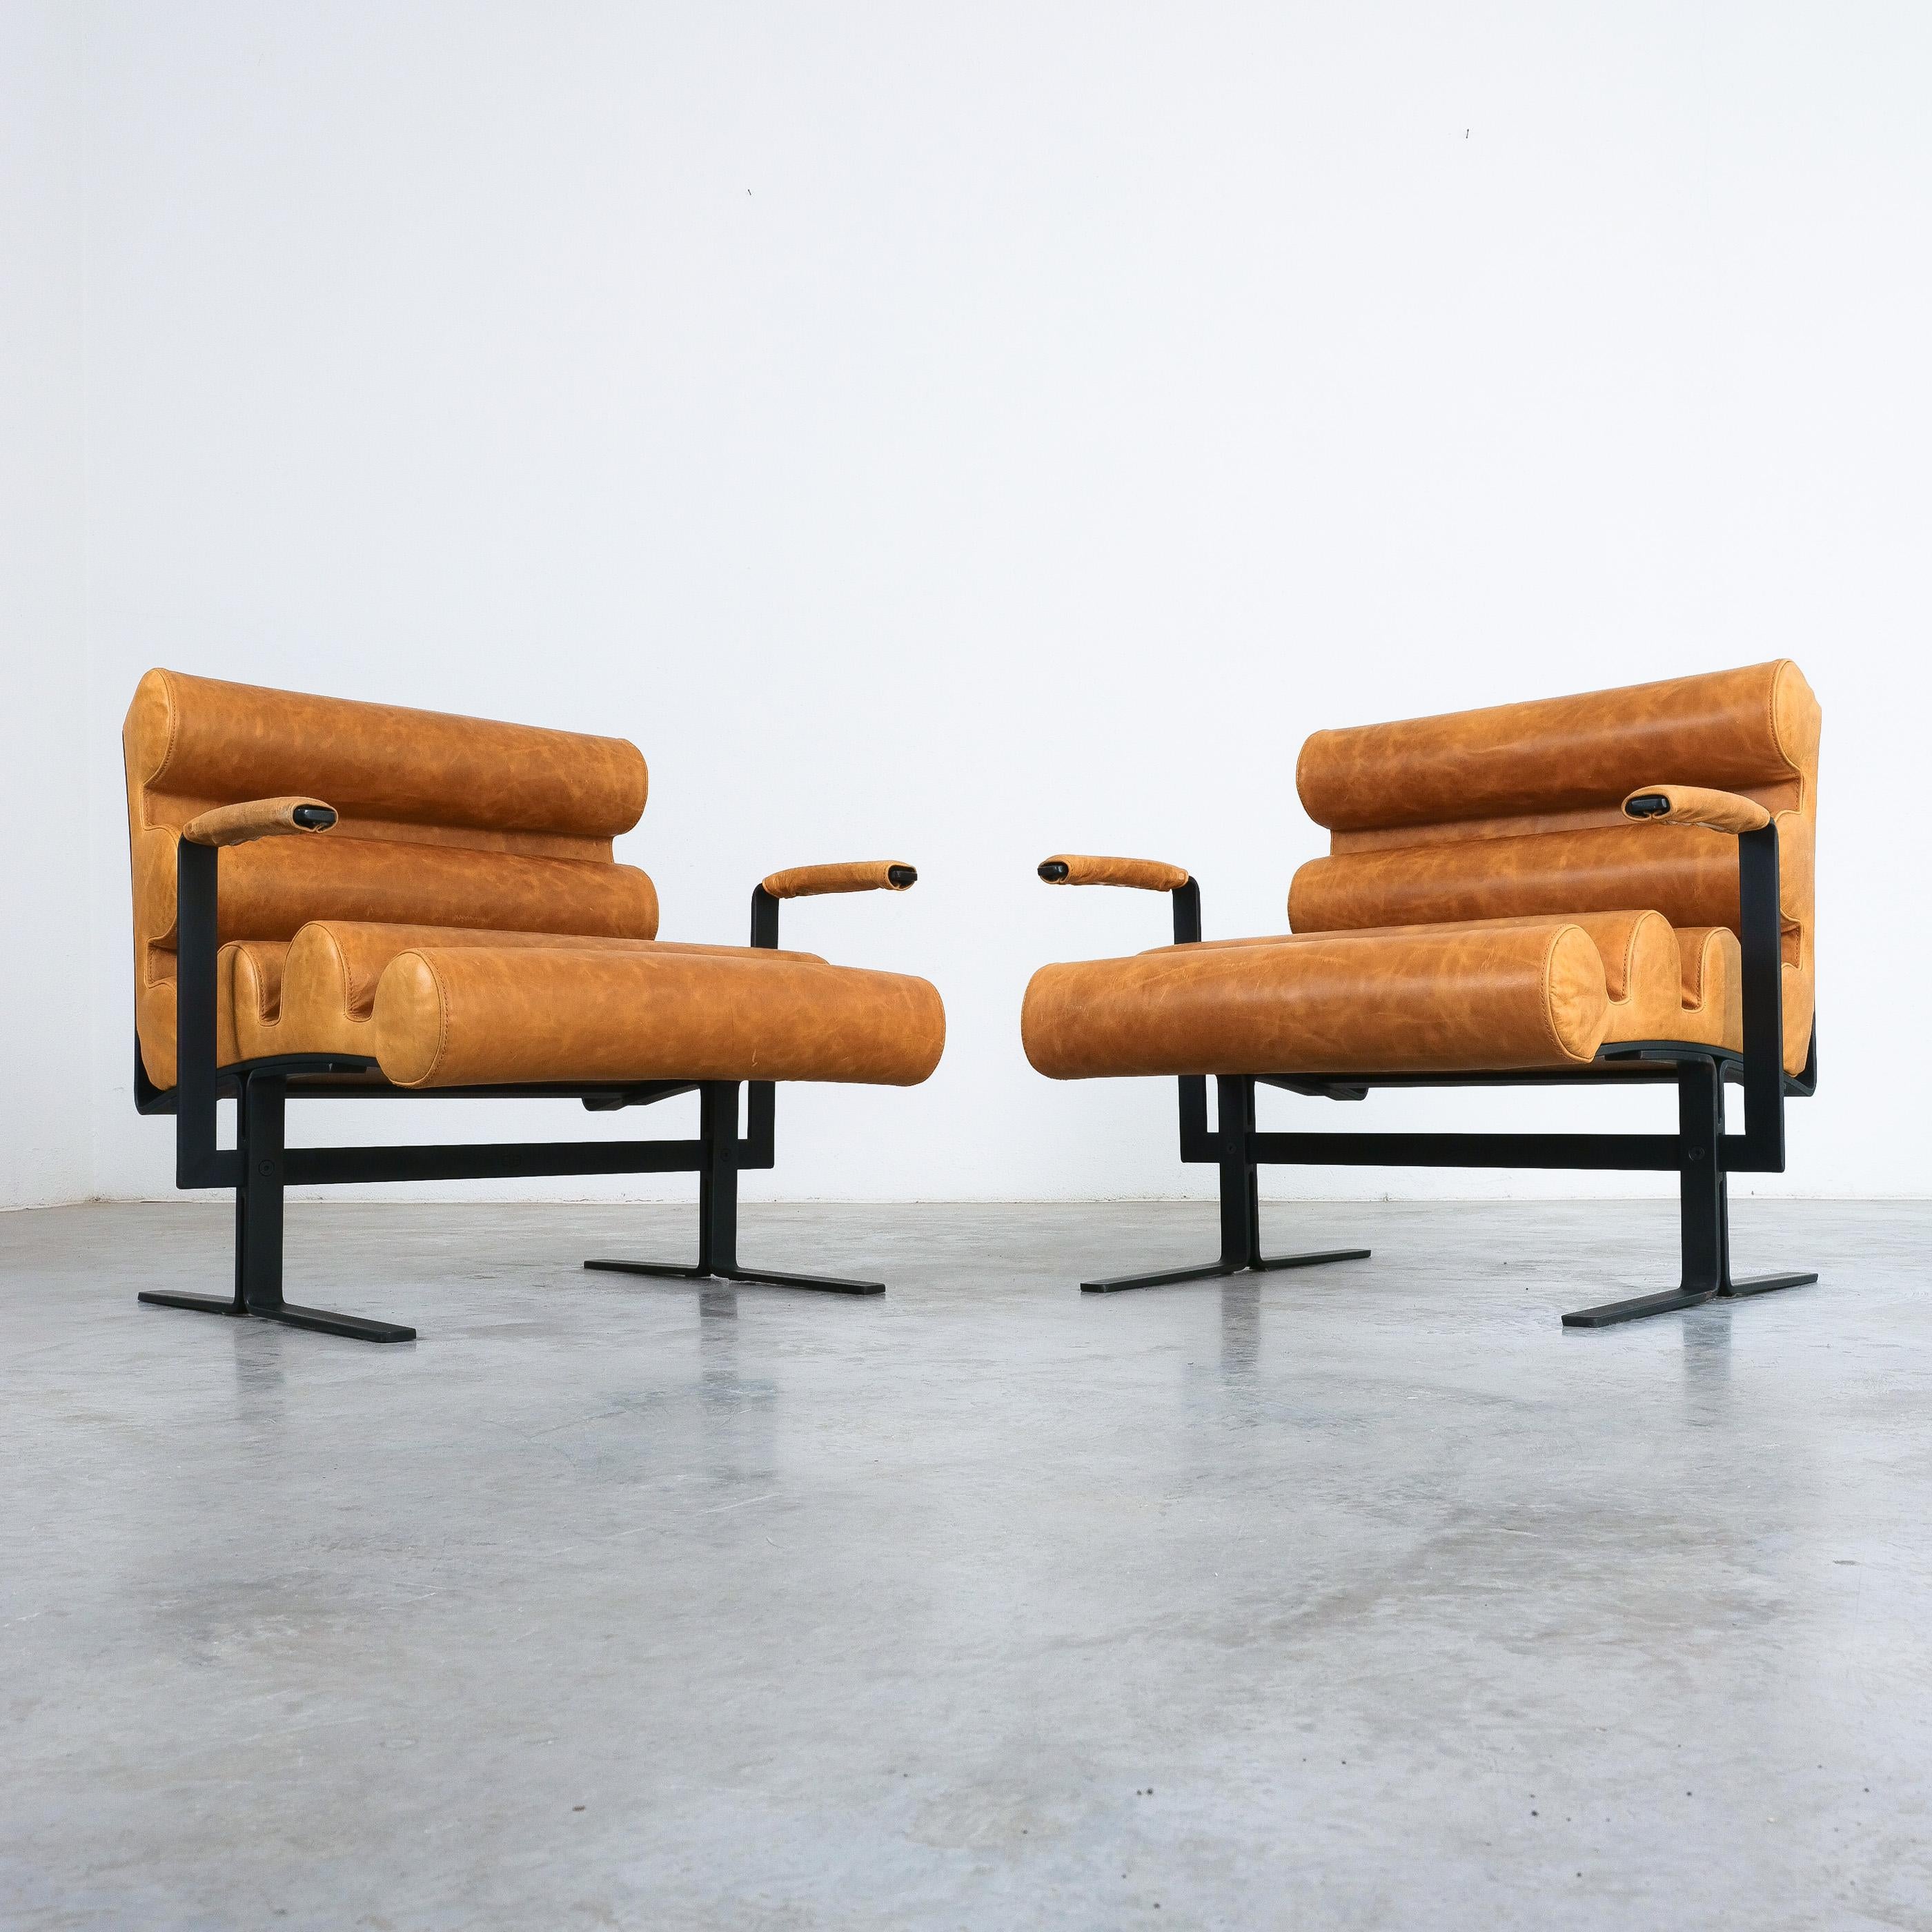 Joe Colombo For Sormani Roll Brown Leather Spring Steel Armchair Pair (2) , 1962 For Sale 2